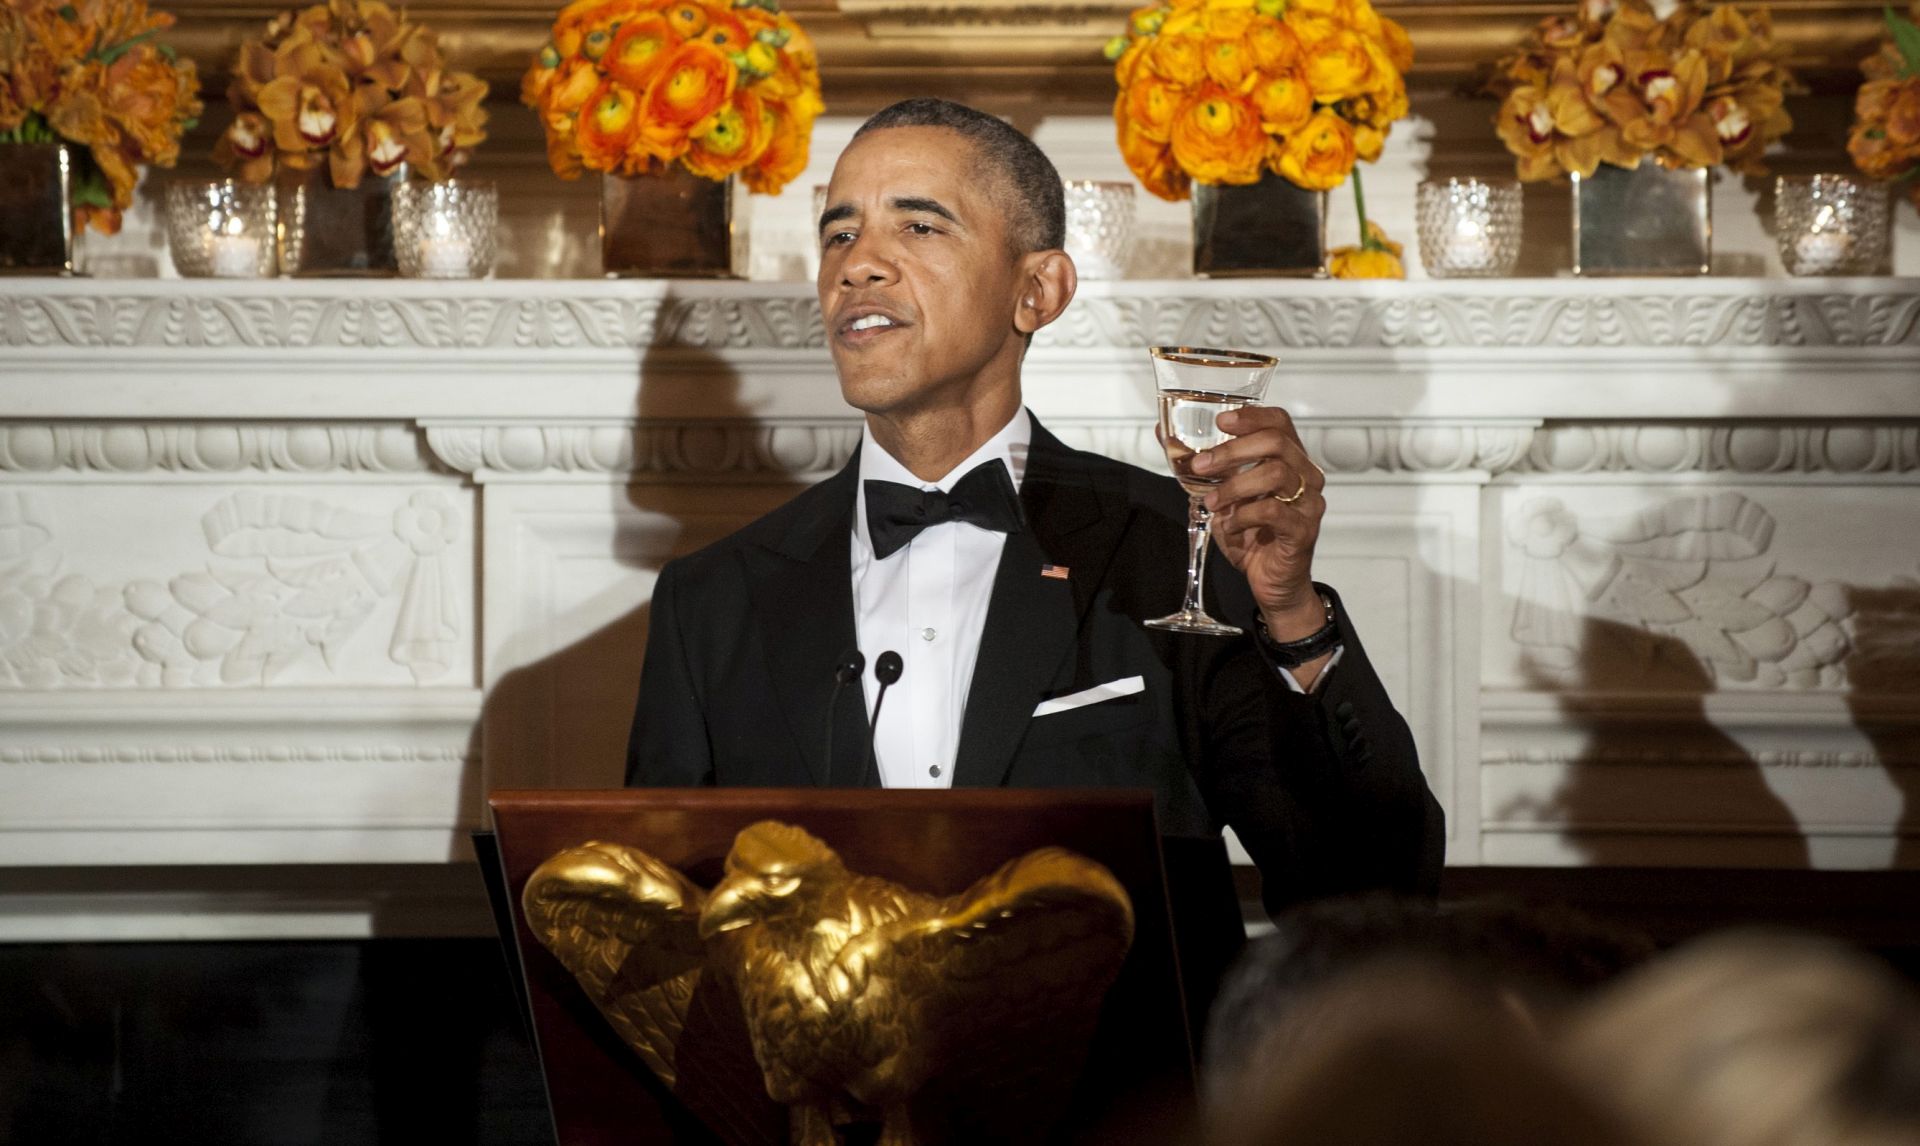 epa05174579 US President Barack Obama gives a toast during a National Governors Association dinner and reception in the State Dining Room of the White House in Washington, DC, USA, 21 February 2016. Obama said this past week the Constitution requires the Senate to consider his nominee to replace Antonin Scalia, who died on 13 February, on the US Supreme Court and cast Republican leader's initial refusal to do so as a test of 'fair play.'  EPA/PETE MAROVICH/POOL